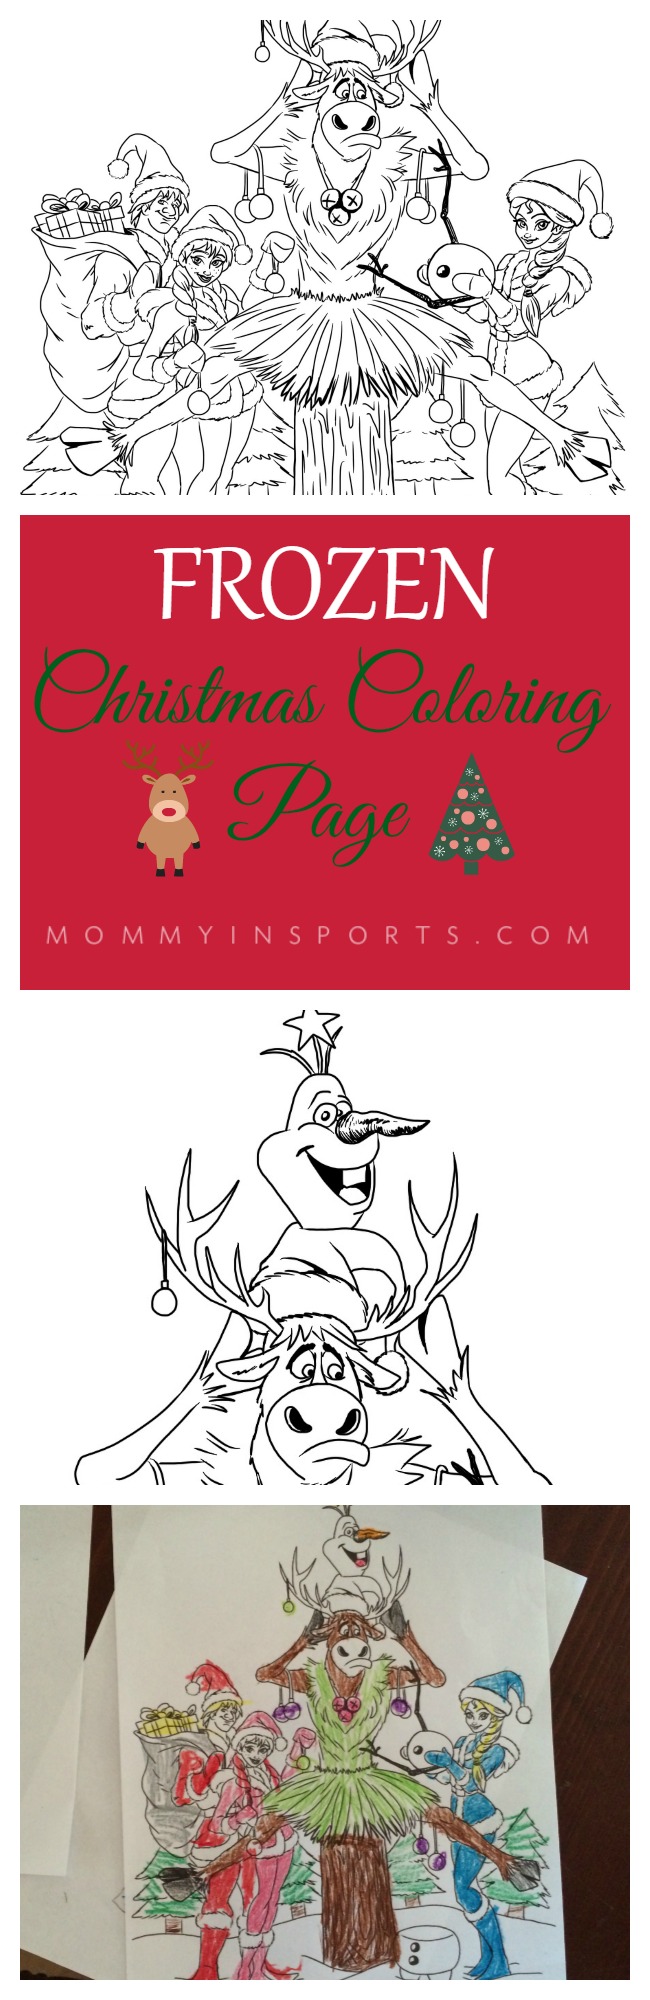 Free Frozen Christmas Coloring page, original art your kids will LOVE!